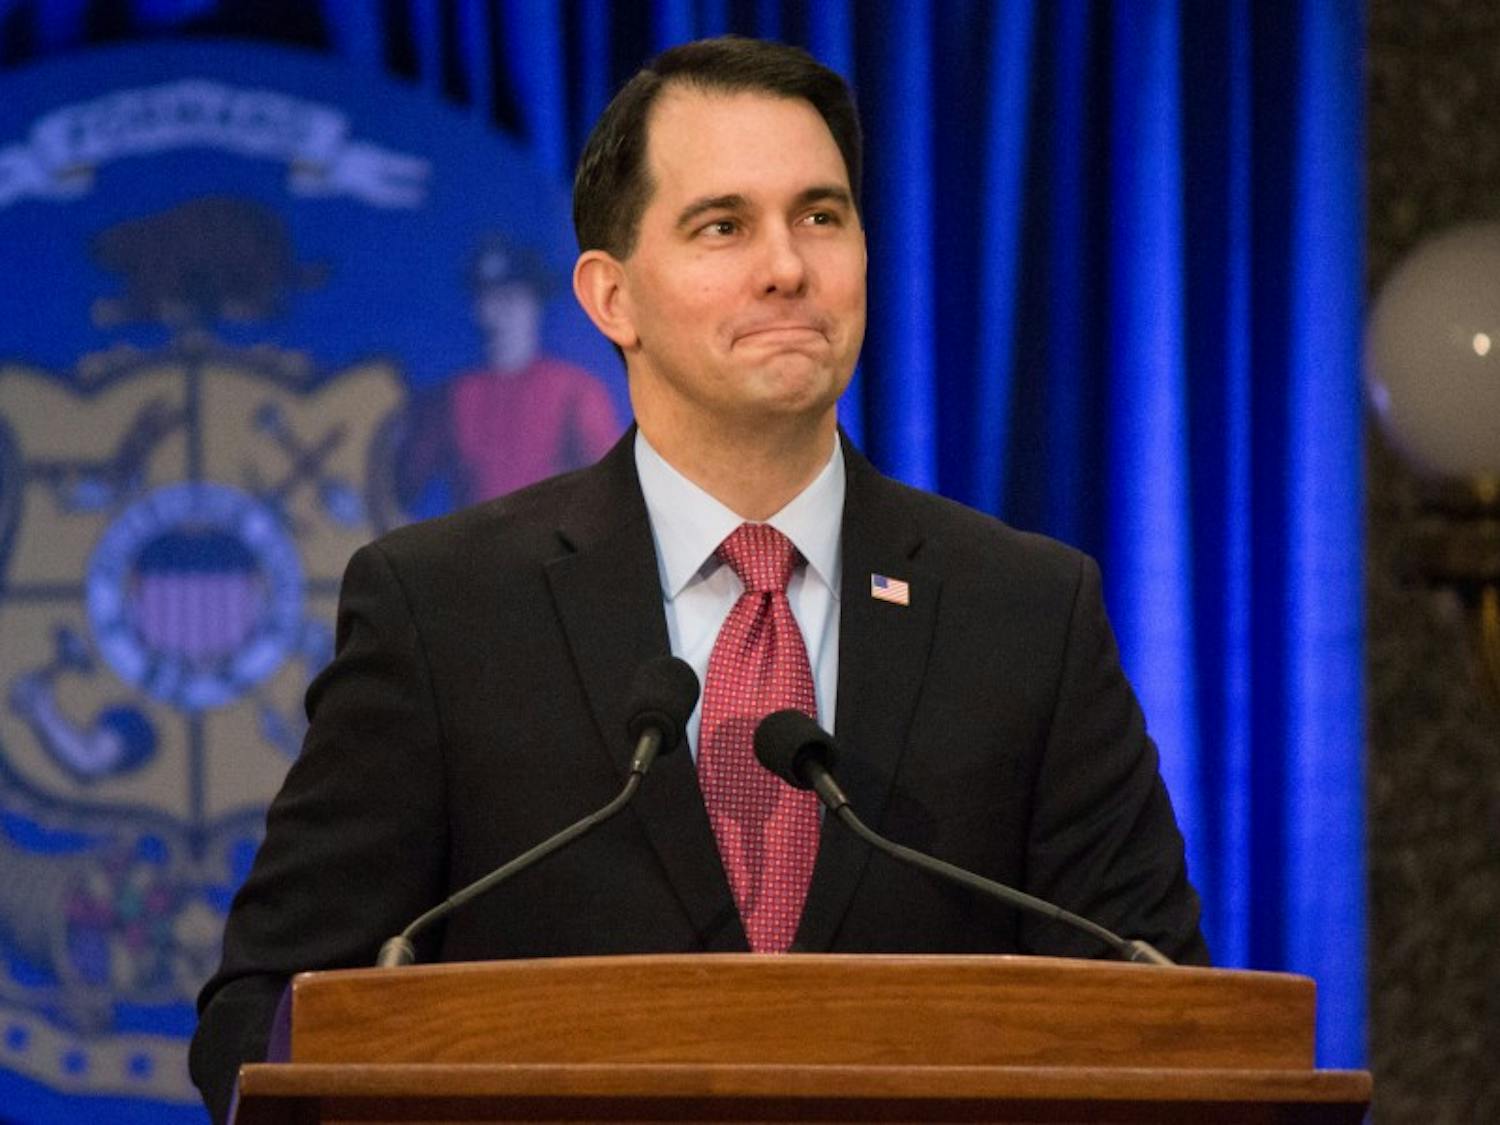 Assembly Democrats filed a formal complaint Thursday asking Dane County District Attorney Ismael Ozanne to examine potential campaign finance violations committed by Gov. Scott Walker.